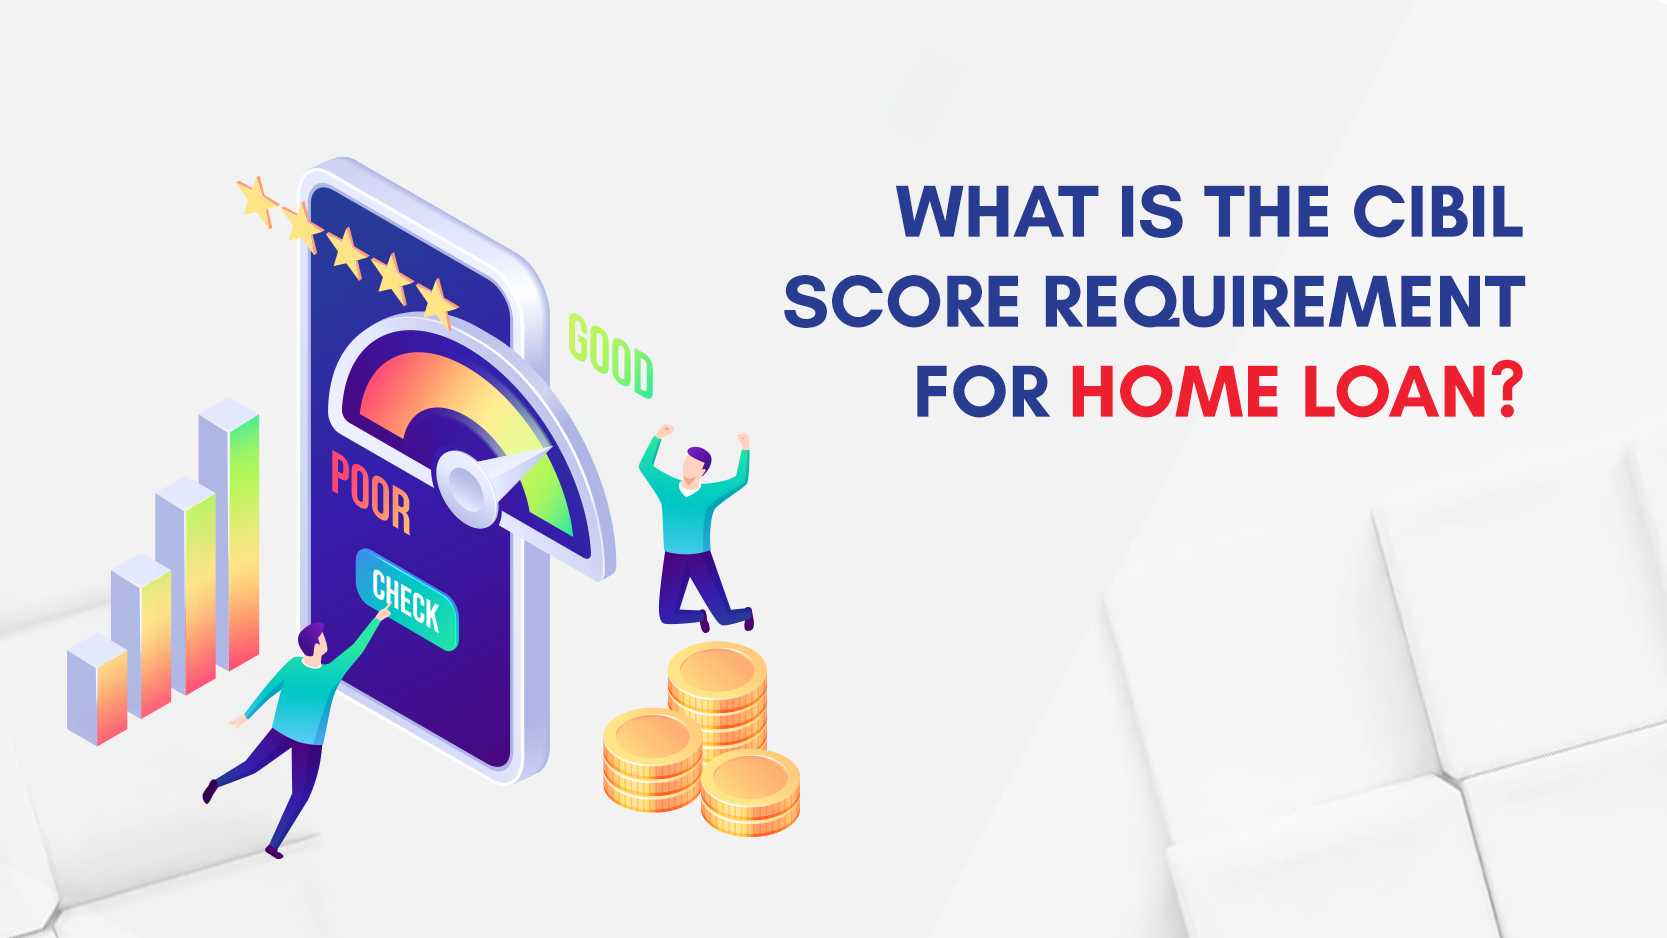 WHAT IS THE CIBIL
SCORE REQUIREMENT
FOR HOME LOAN?